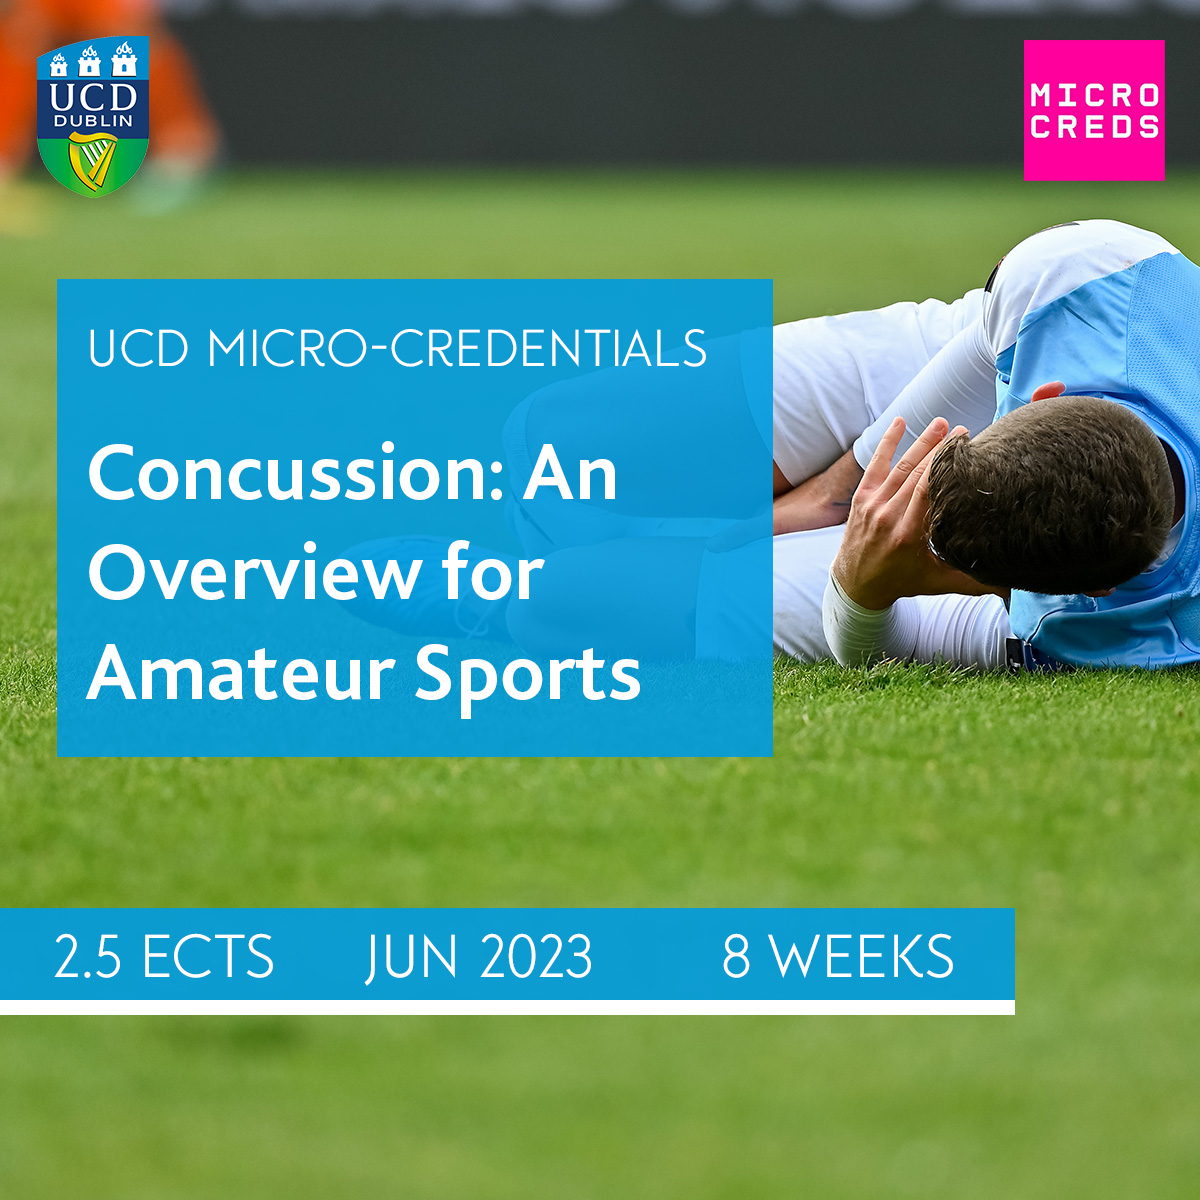 New, online #microcredential in the area of #ConcussionAwareness from #UCD

If you are involved in amateur sports and want to better recognise the signs of concussion, this course is for you.

Starts June 2023 | Online | €200; lnkd.in/dBBzn2yW

#SportsConcussion